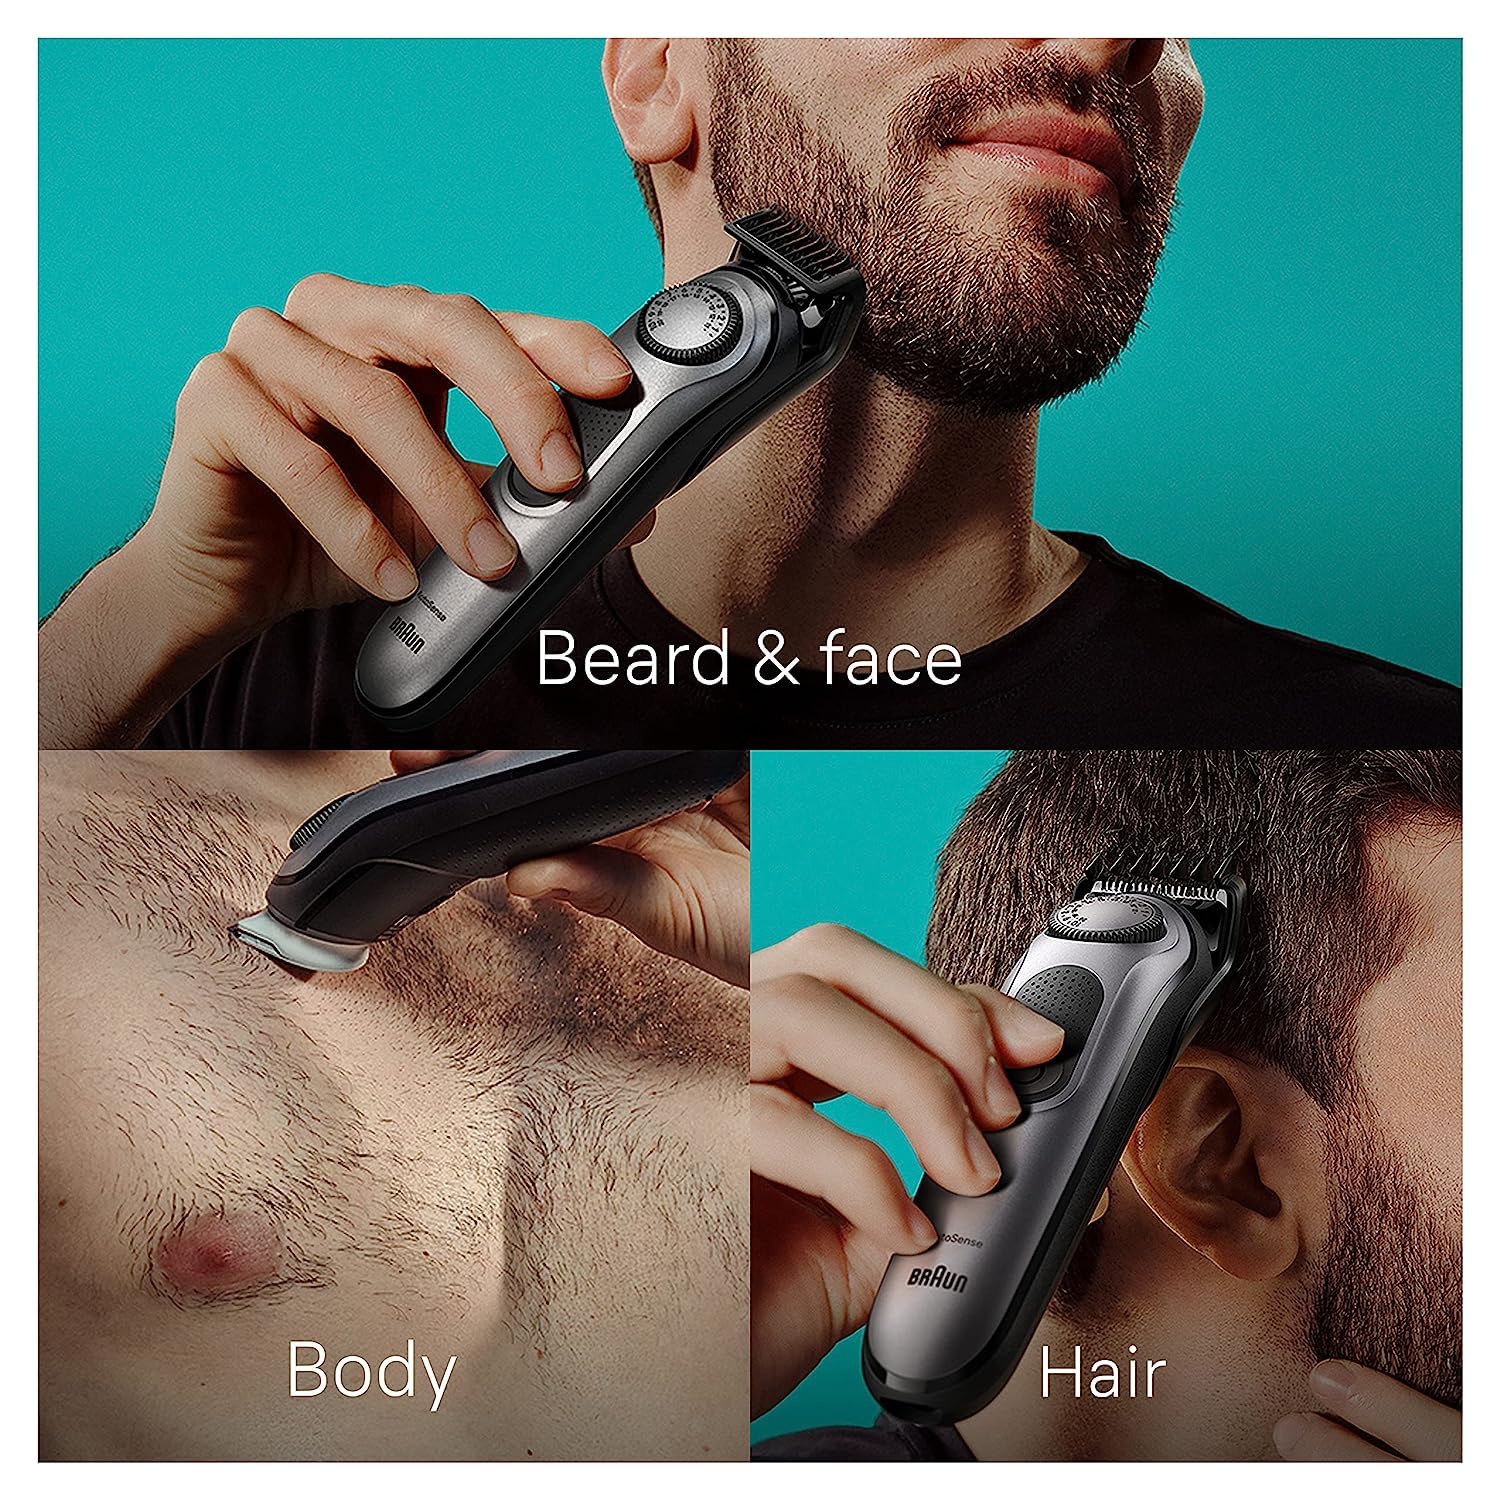 Braun All-in-One Style Kit Series 7 7440, 12-in-1 Trimmer for Men with Beard Trimmer, Body Trimmer for Manscaping, Hair Clippers & More, Braun\u2019s Sharpest Blade, 40 Length Settings, Waterproof